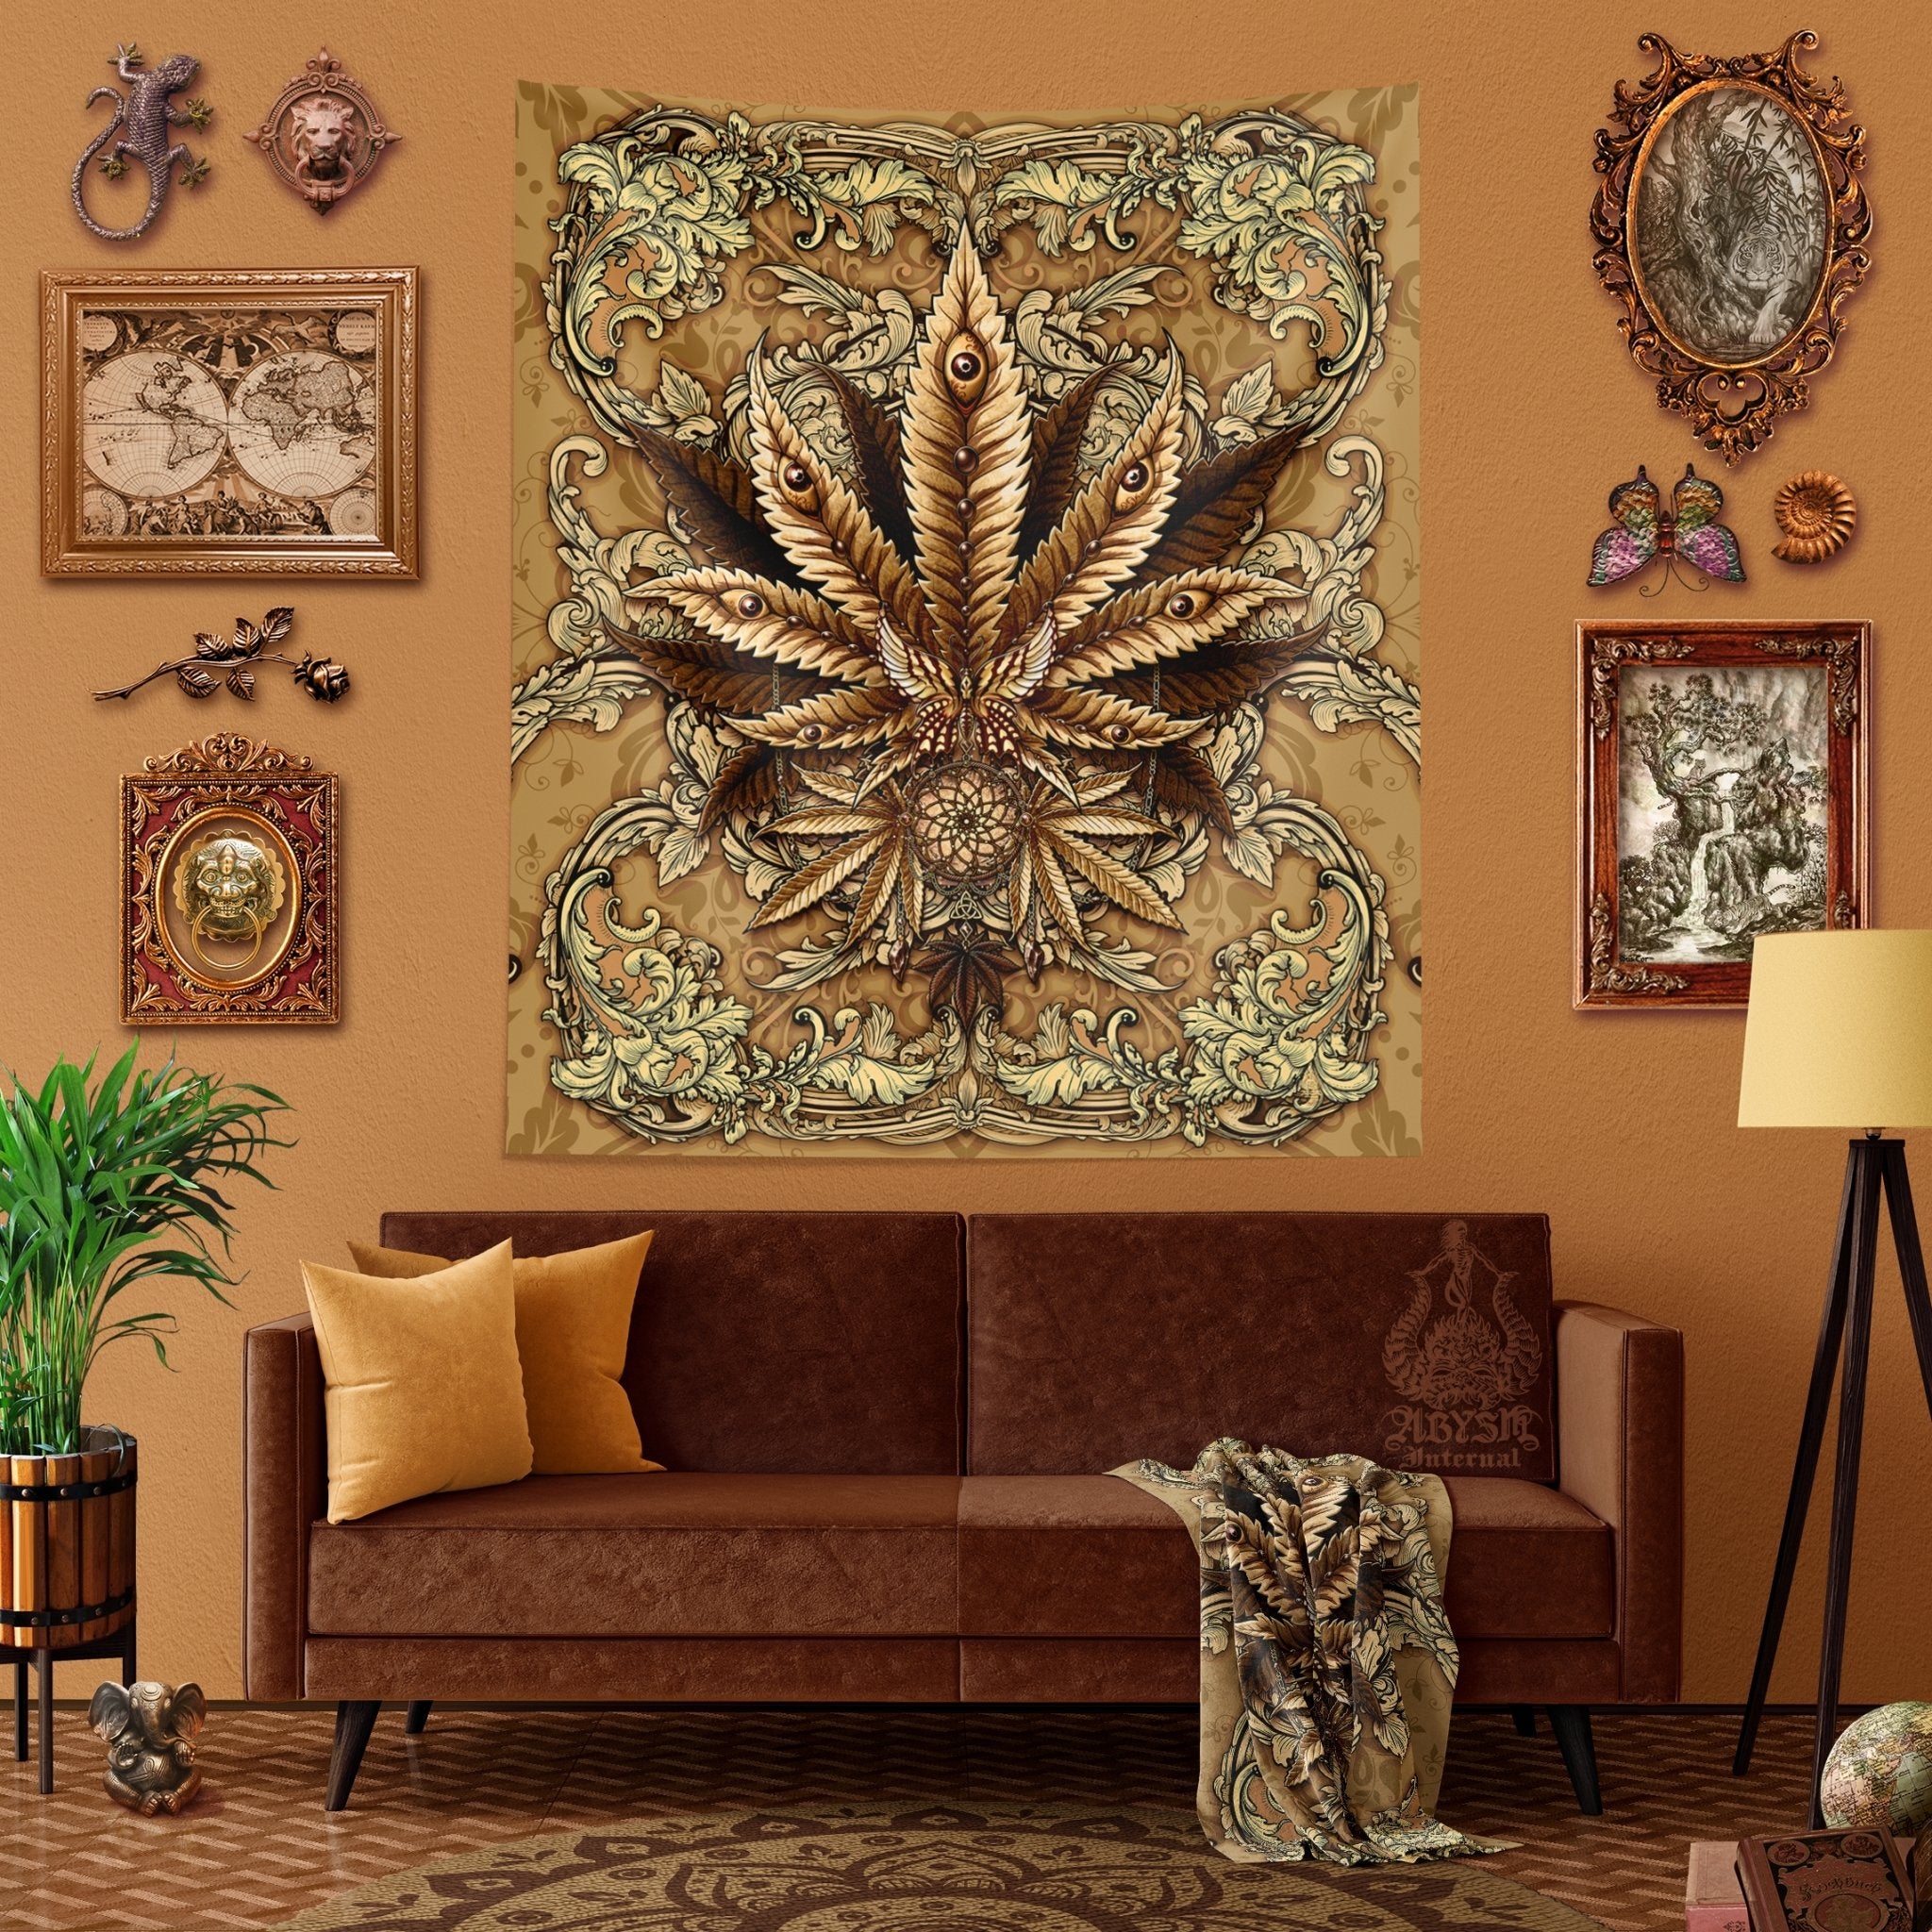 Weed Tapestry, Cannabis Shop Decor, Marijuana Wall Hanging, Hippie Home Decor, Indie Art Print, 420 Gift, Eclectic and Funky - Cream - Abysm Internal